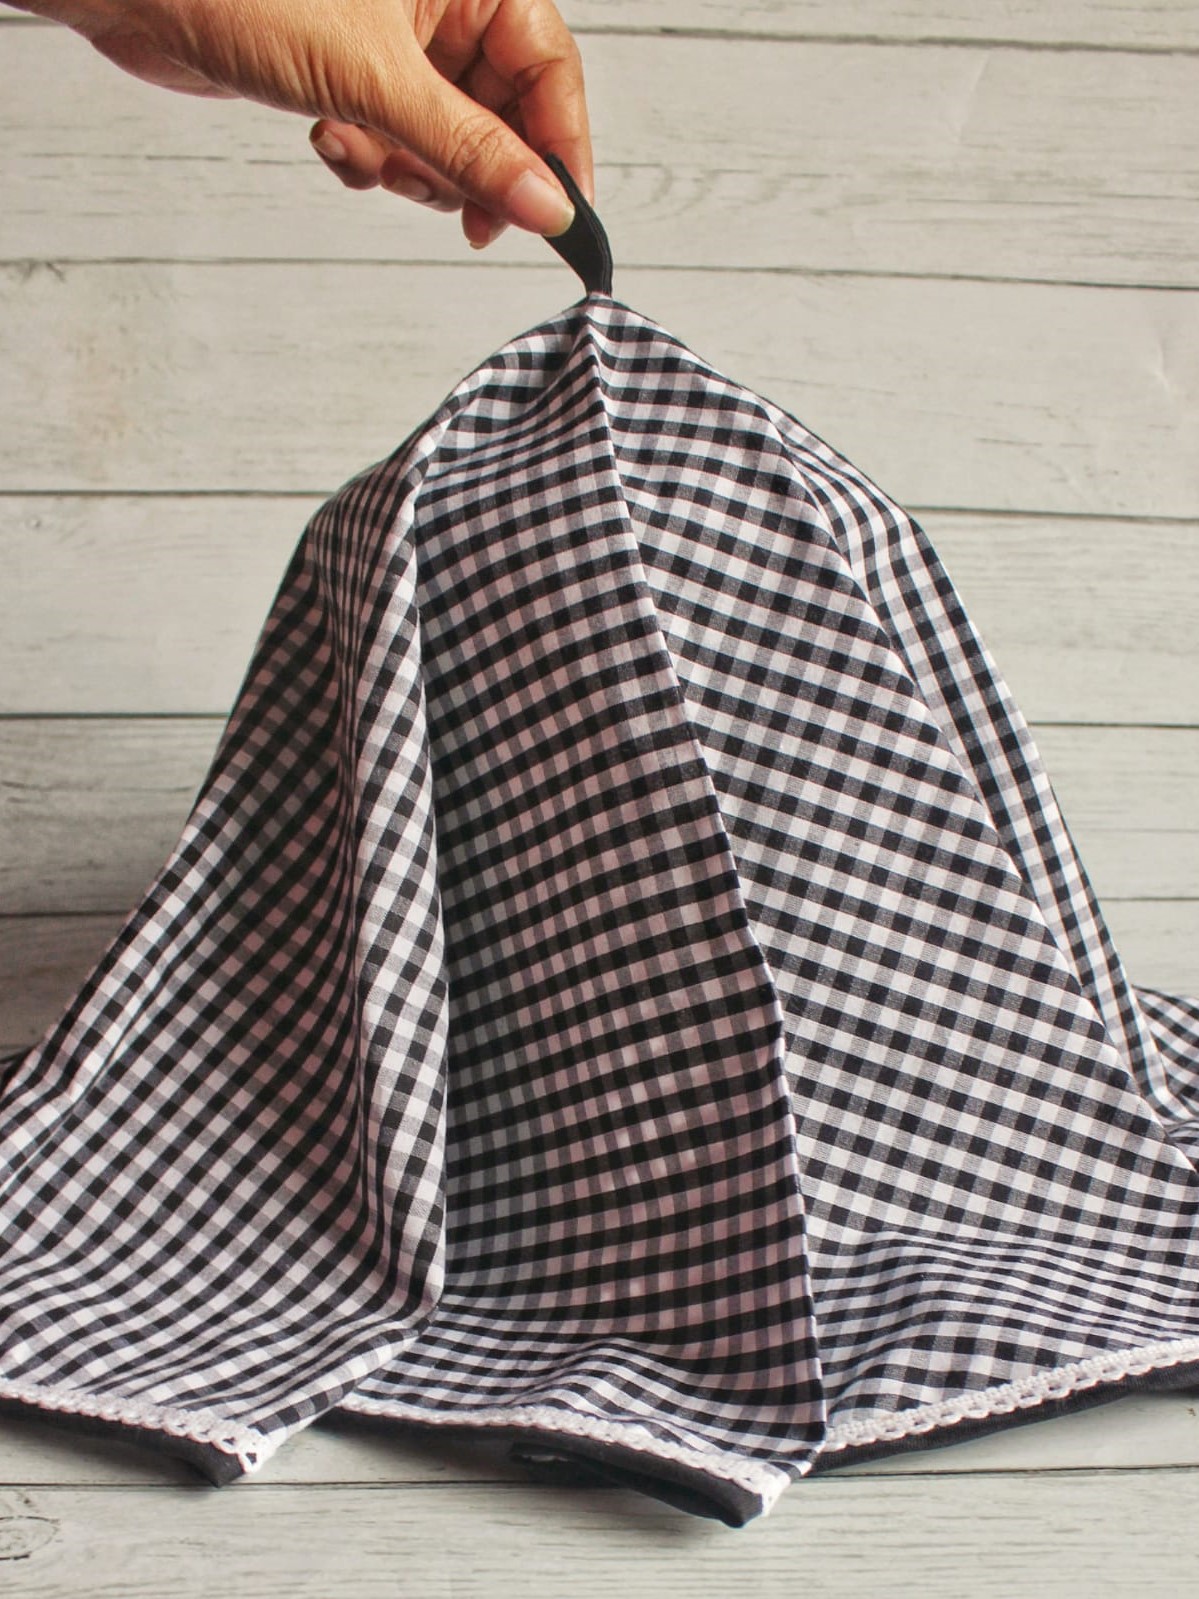 Kitchen Appliance Cover (Round, For Mixies, Kettles etc ) - Classic black gingham with lace